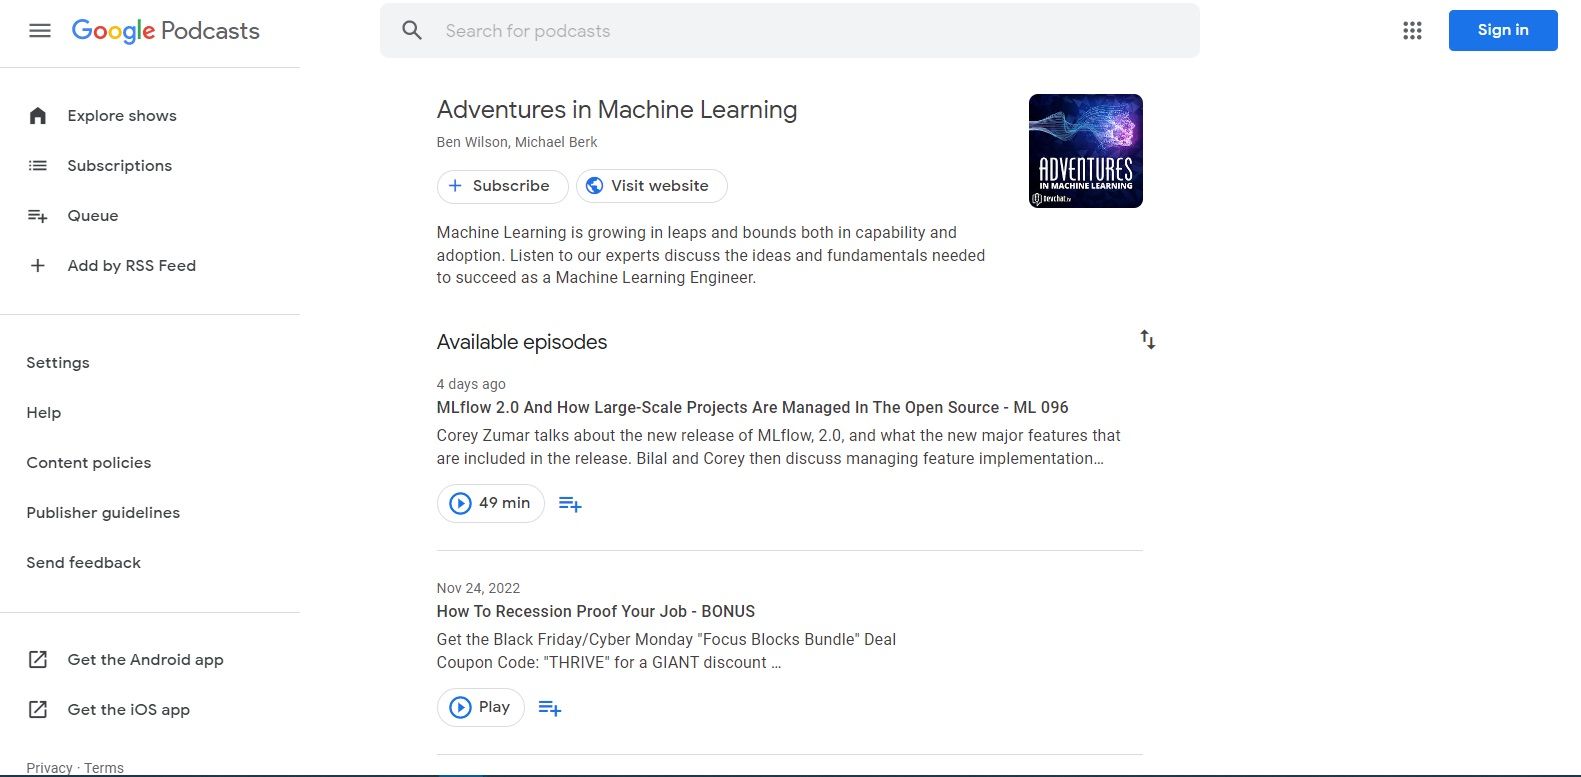 A screenshot of the Adventures in Machine Learning podcast overview